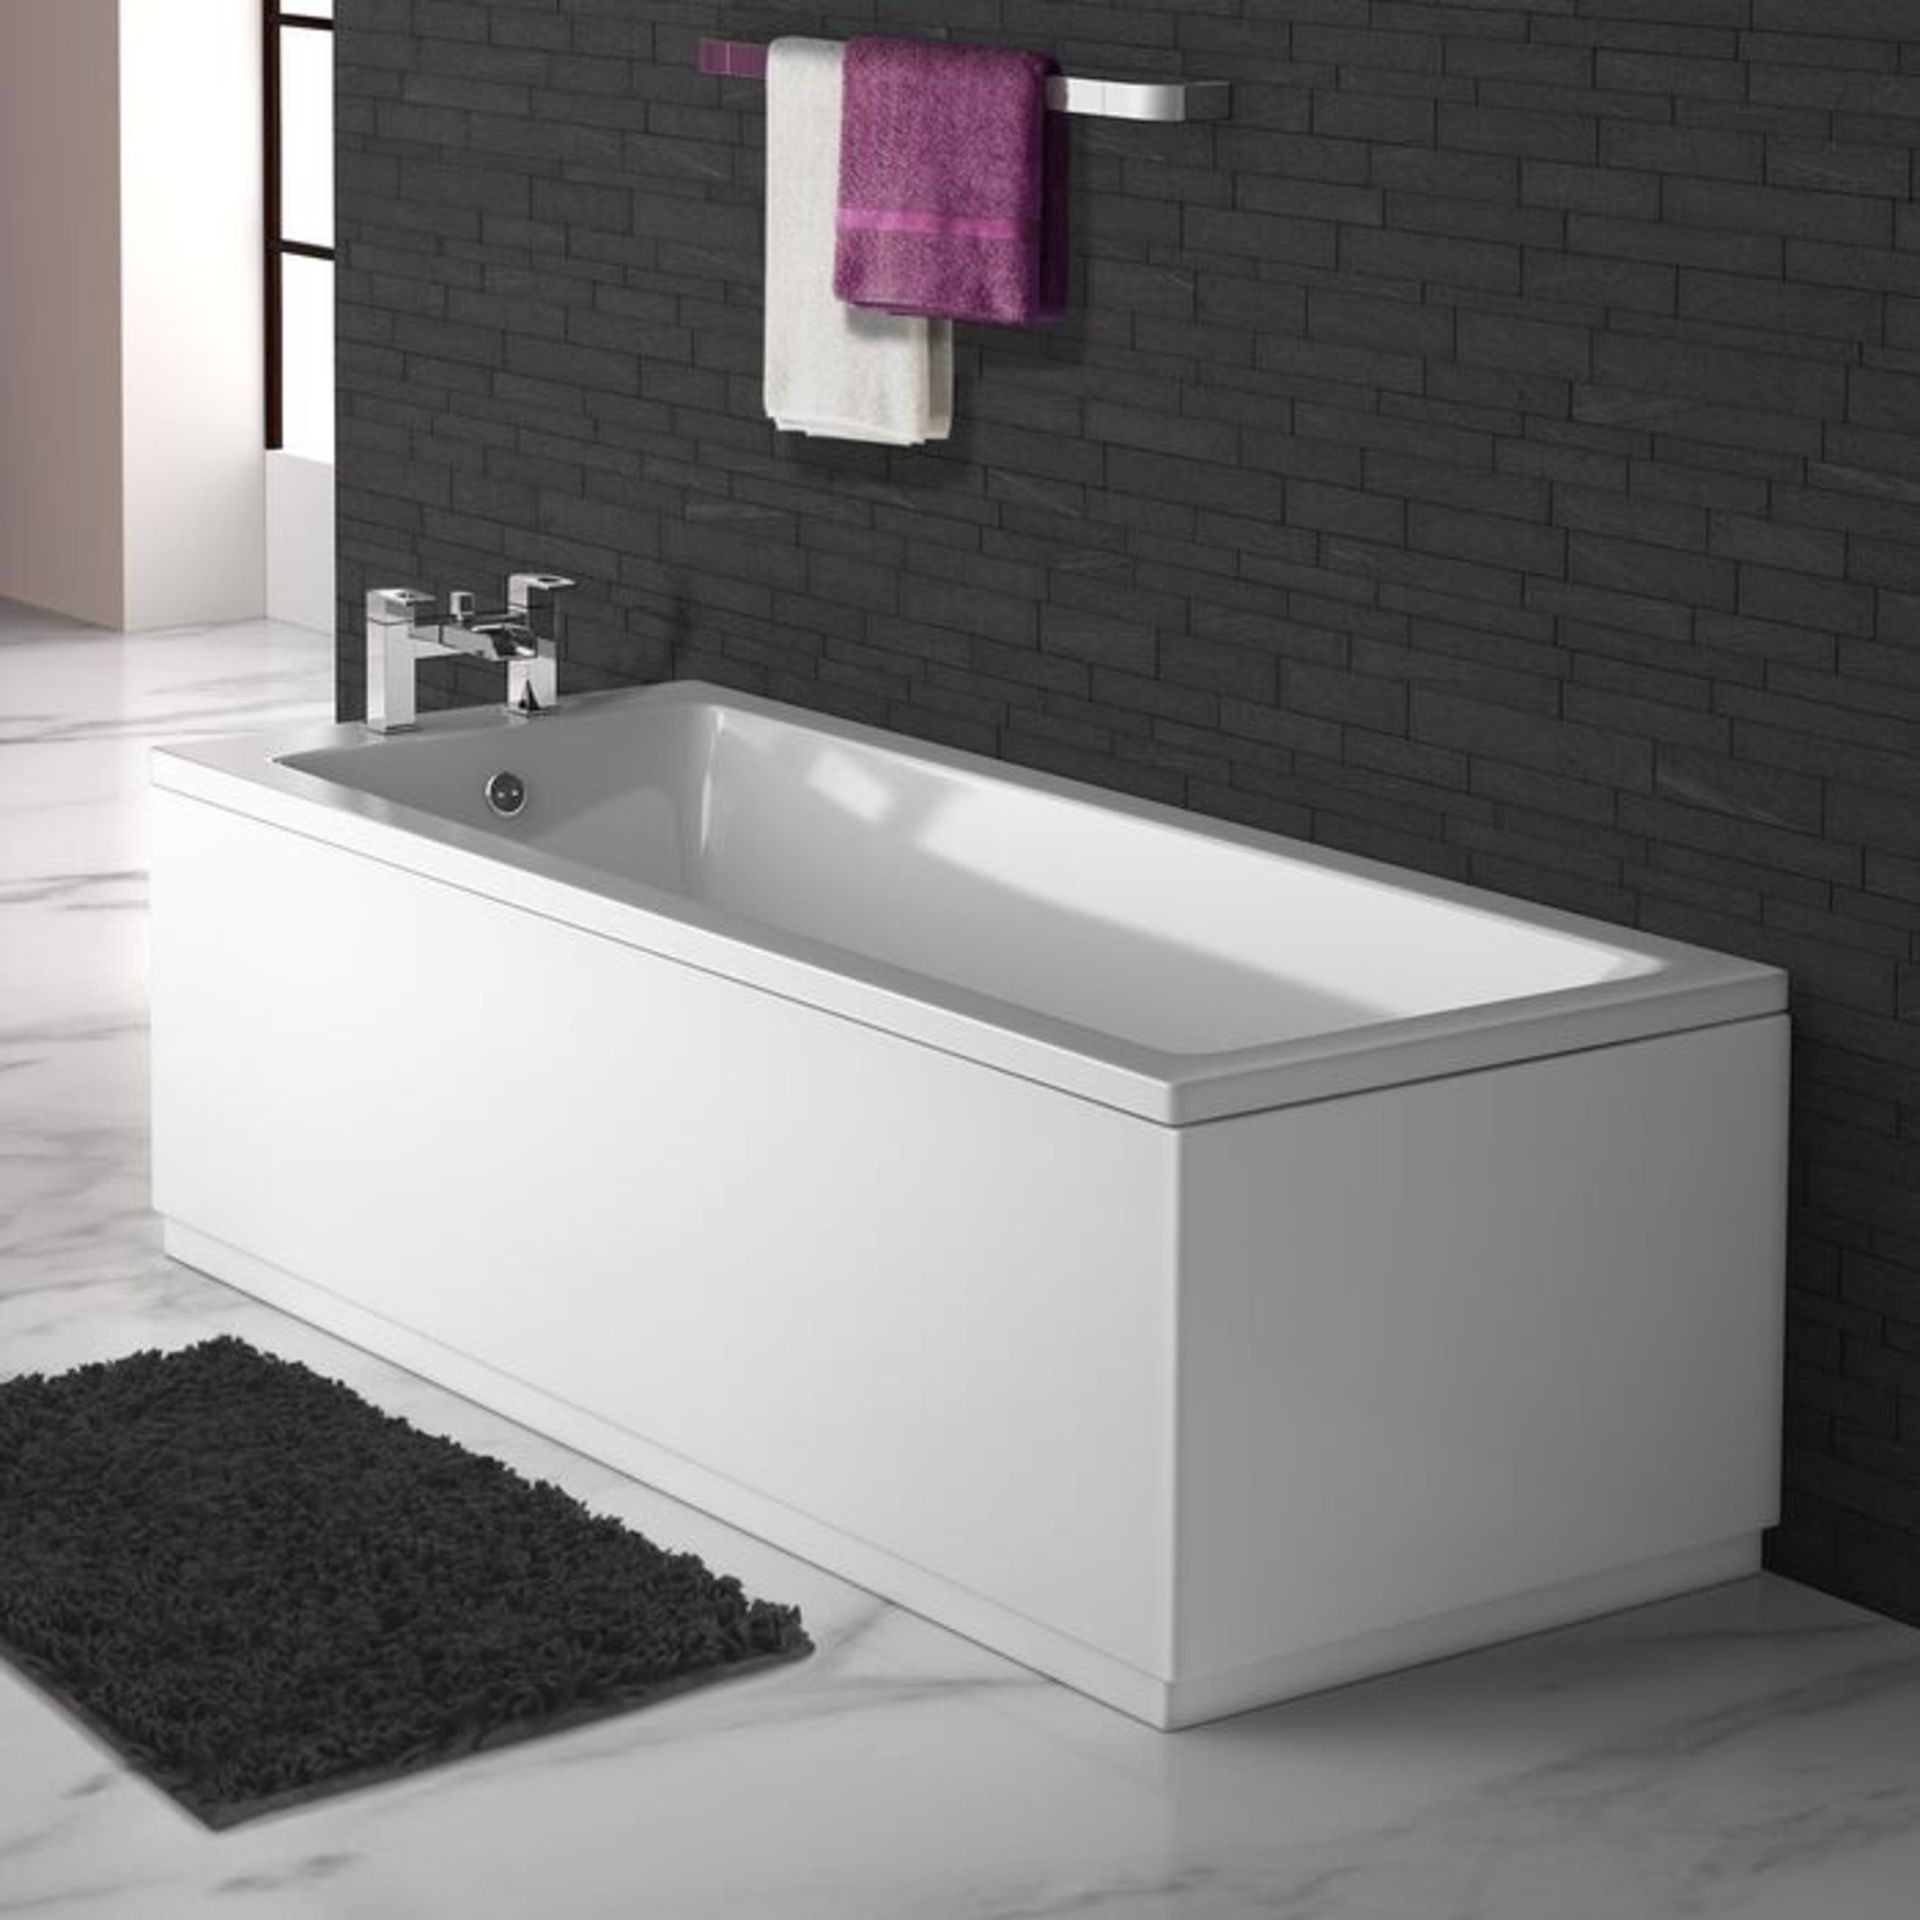 New (D4) 1800x800mm Square Single Ended Bath. RRP £379.99. Manufactured In The UK. Sanitar...